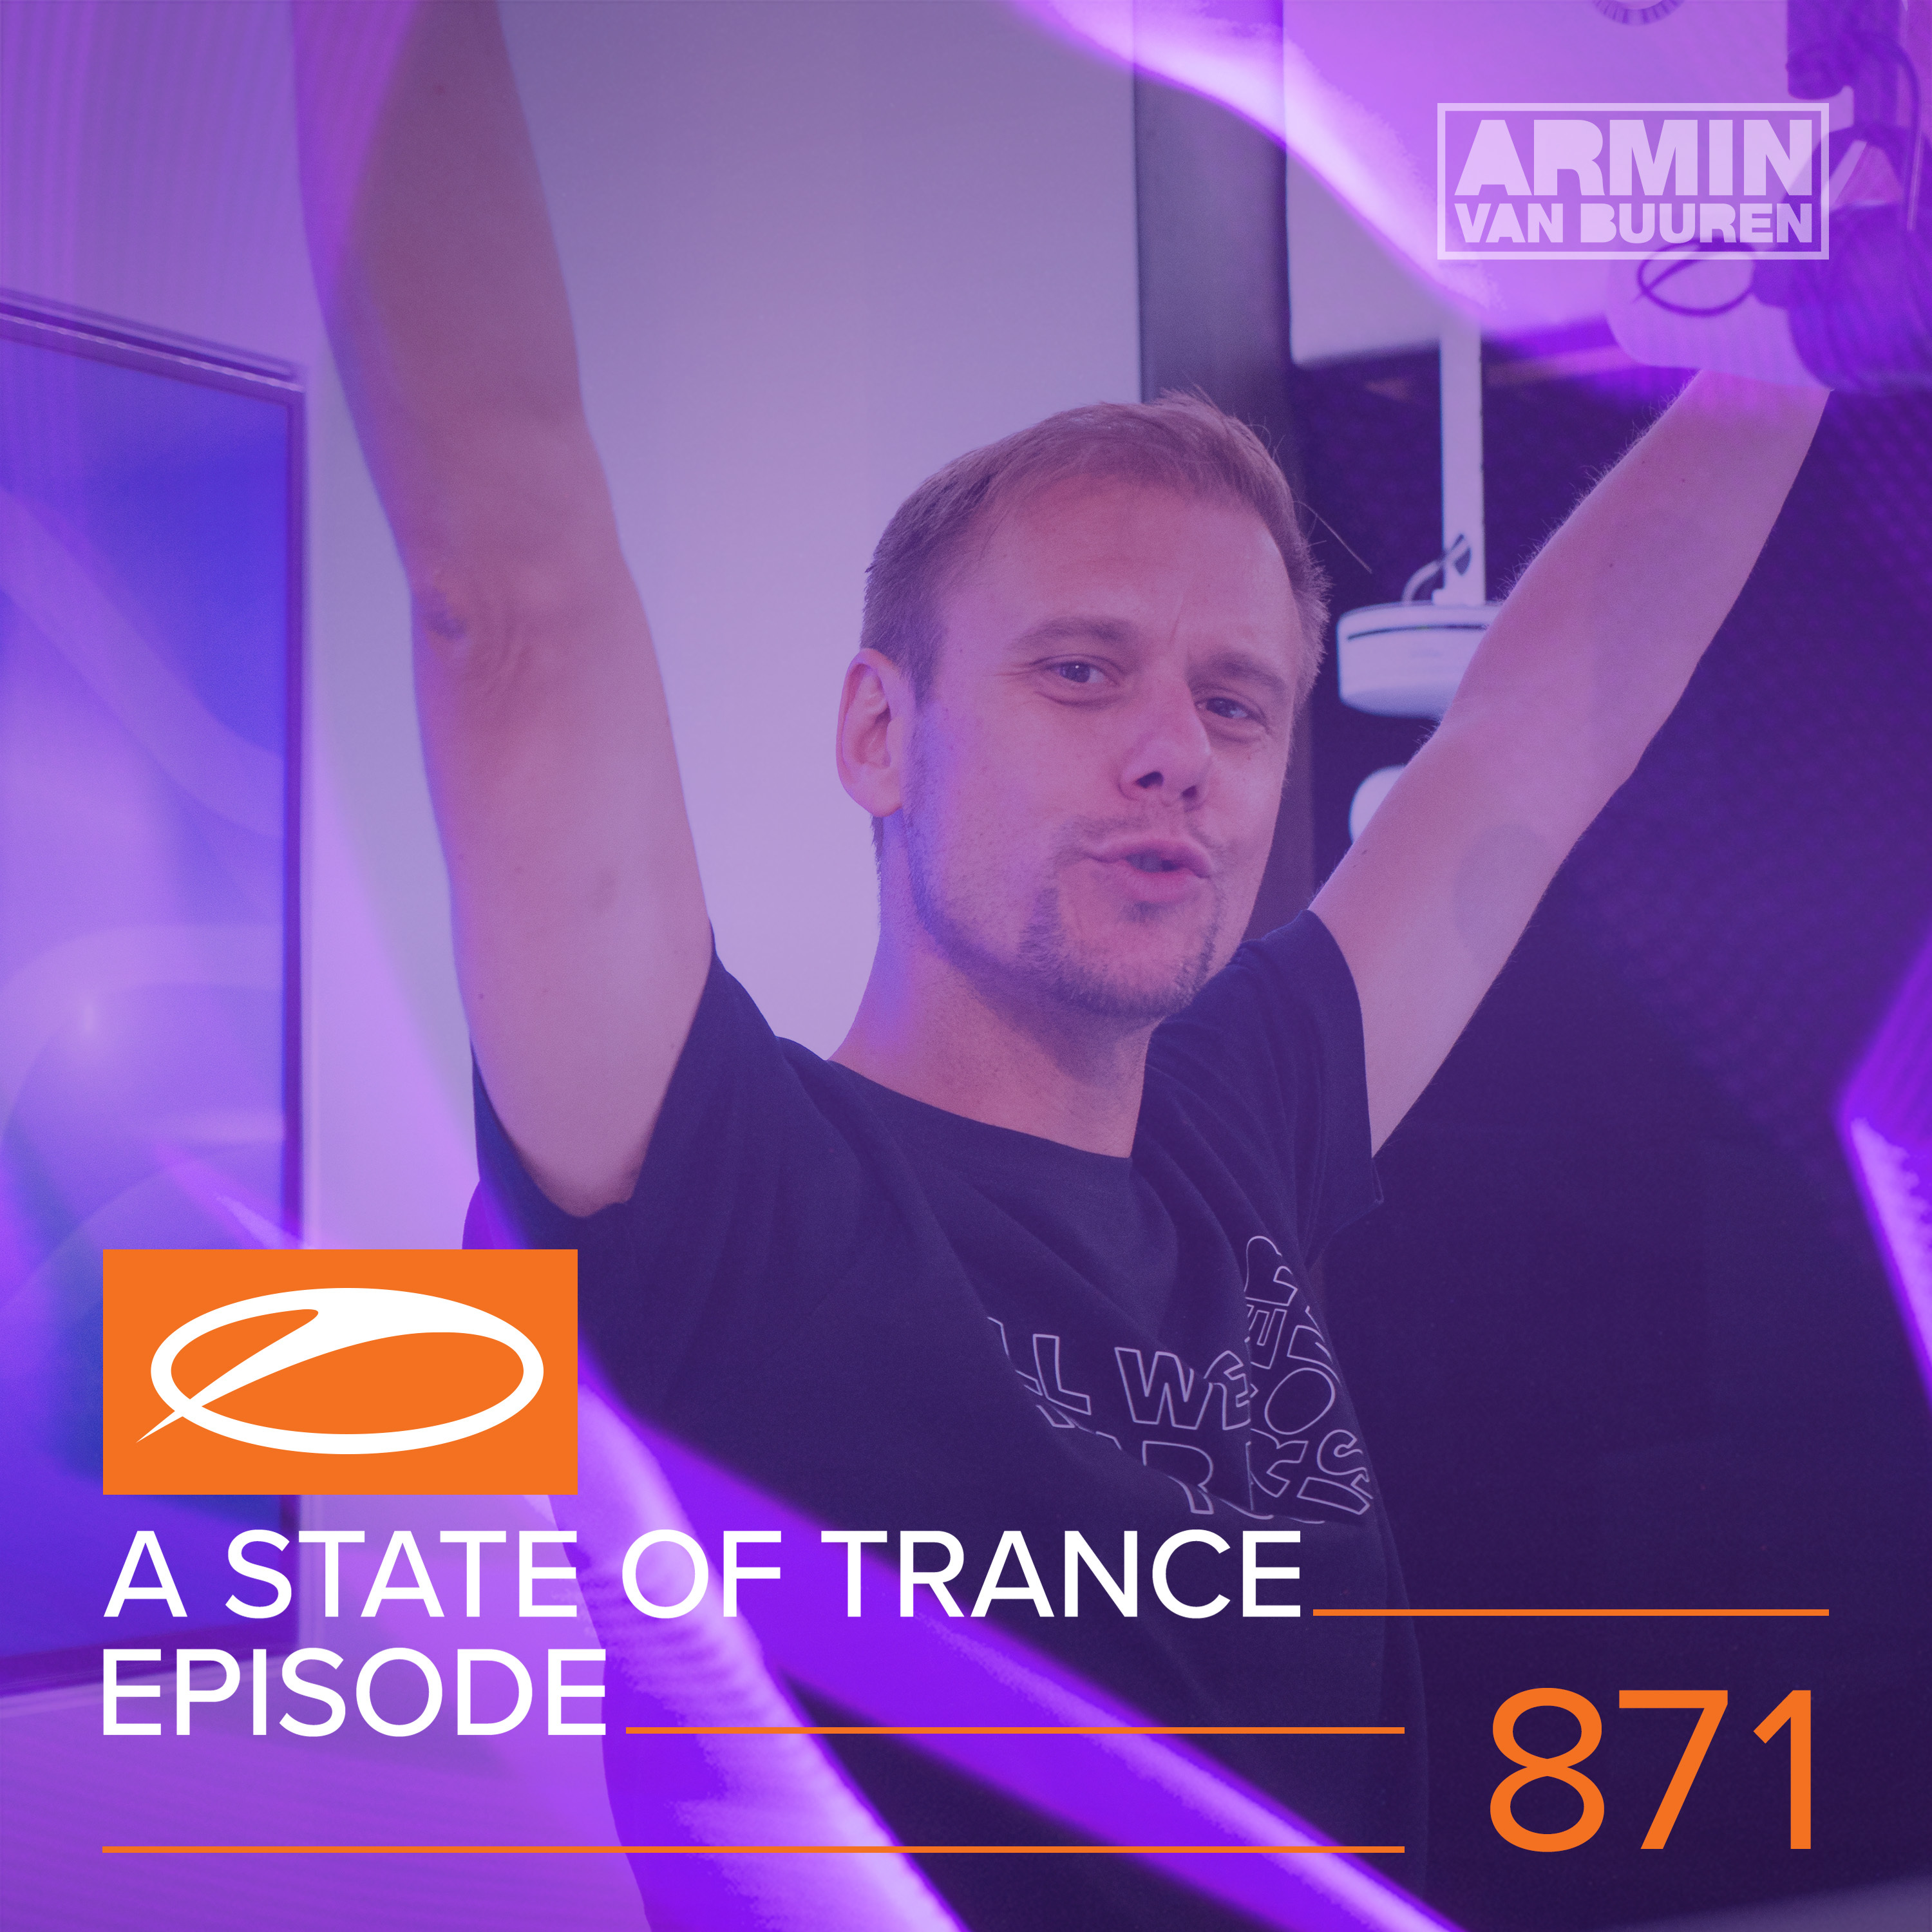 I Want You Here (ASOT 871)